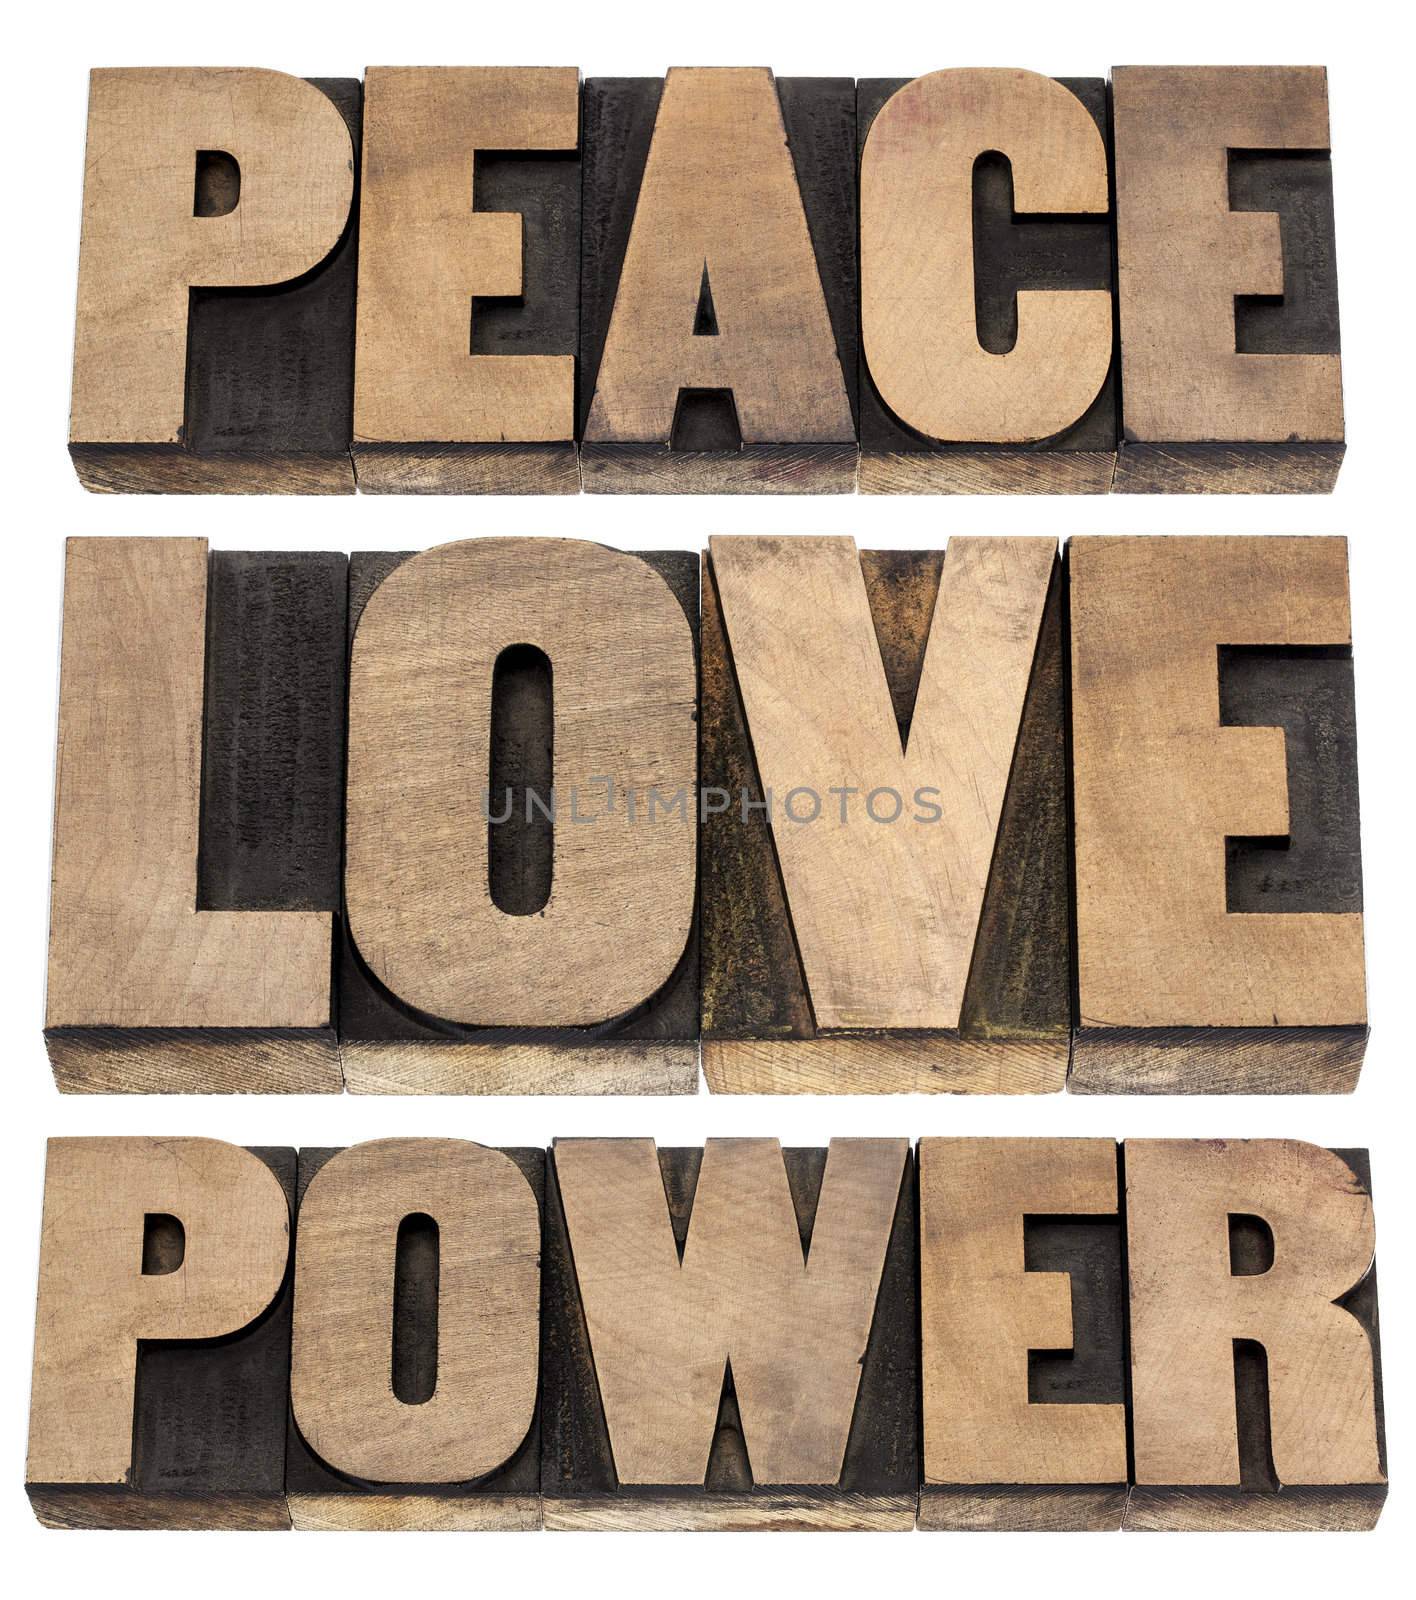 peace, love, power words - isolated text in vintage letterpress wood type printing blocks